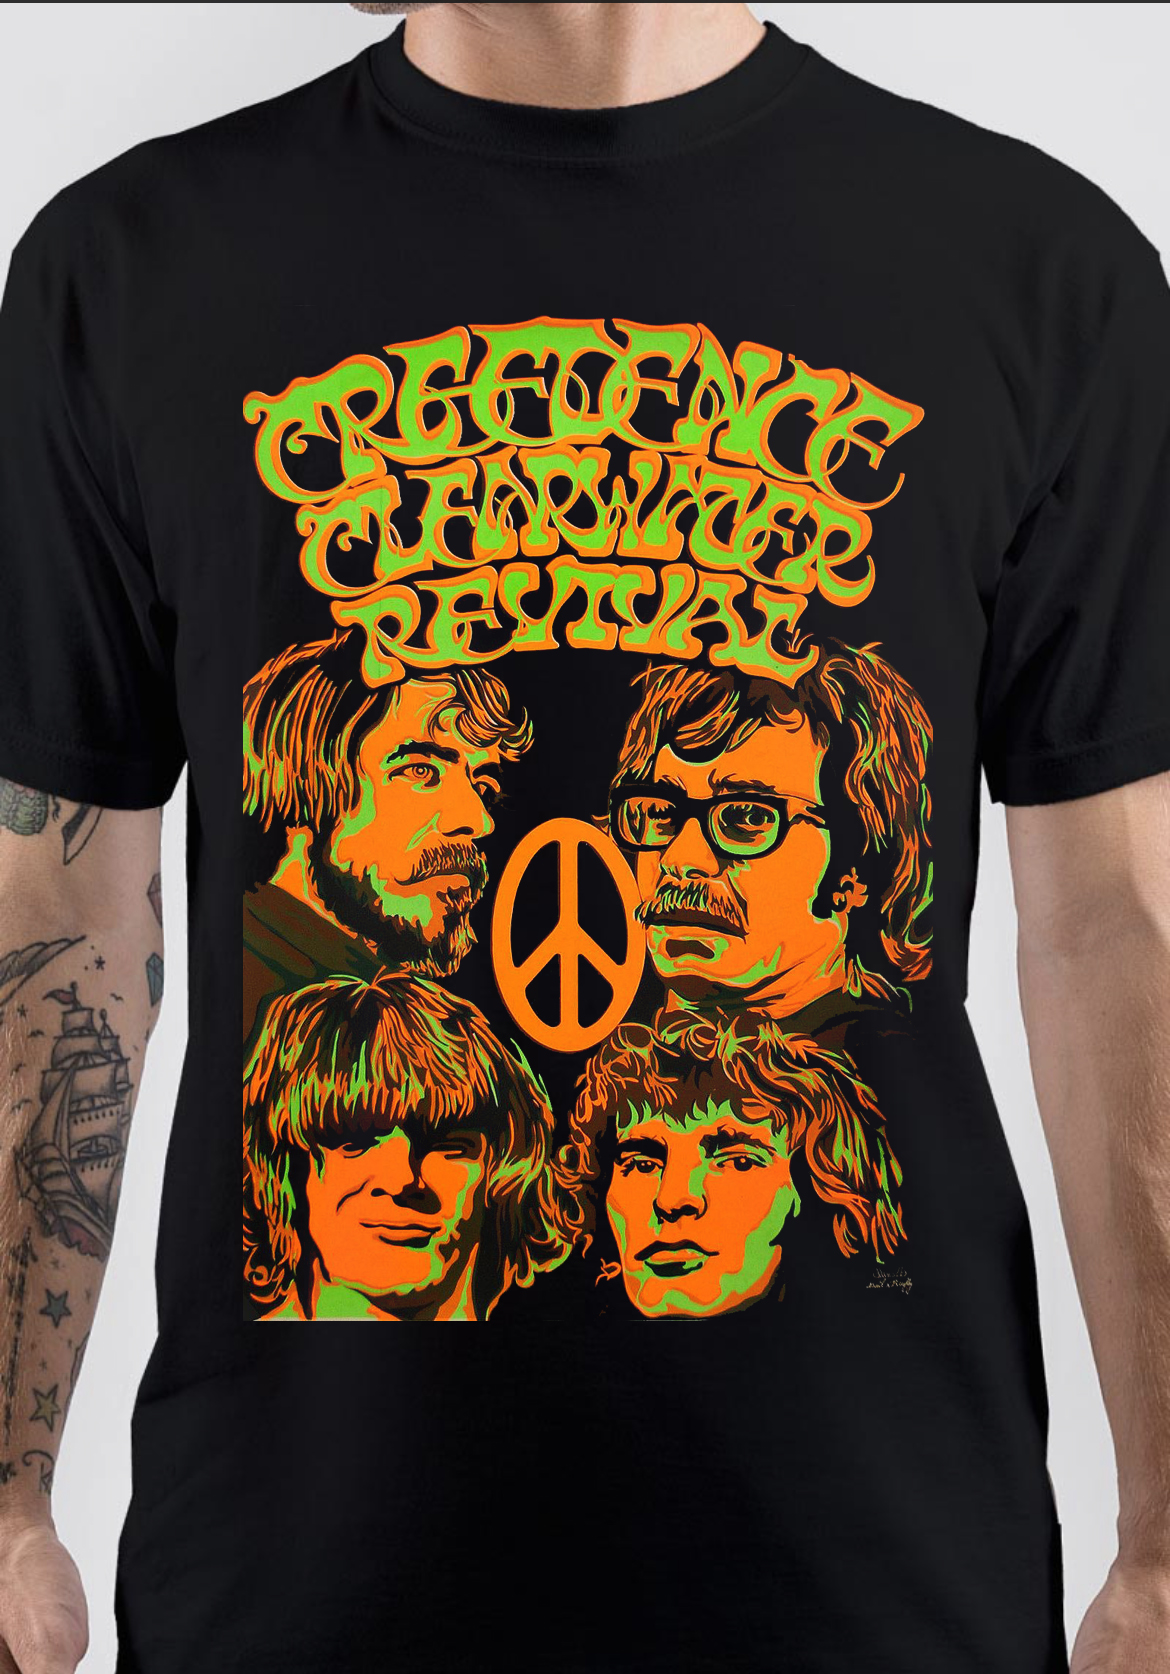 Creedence Clearwater Revival T-Shirt | Swag Shirts